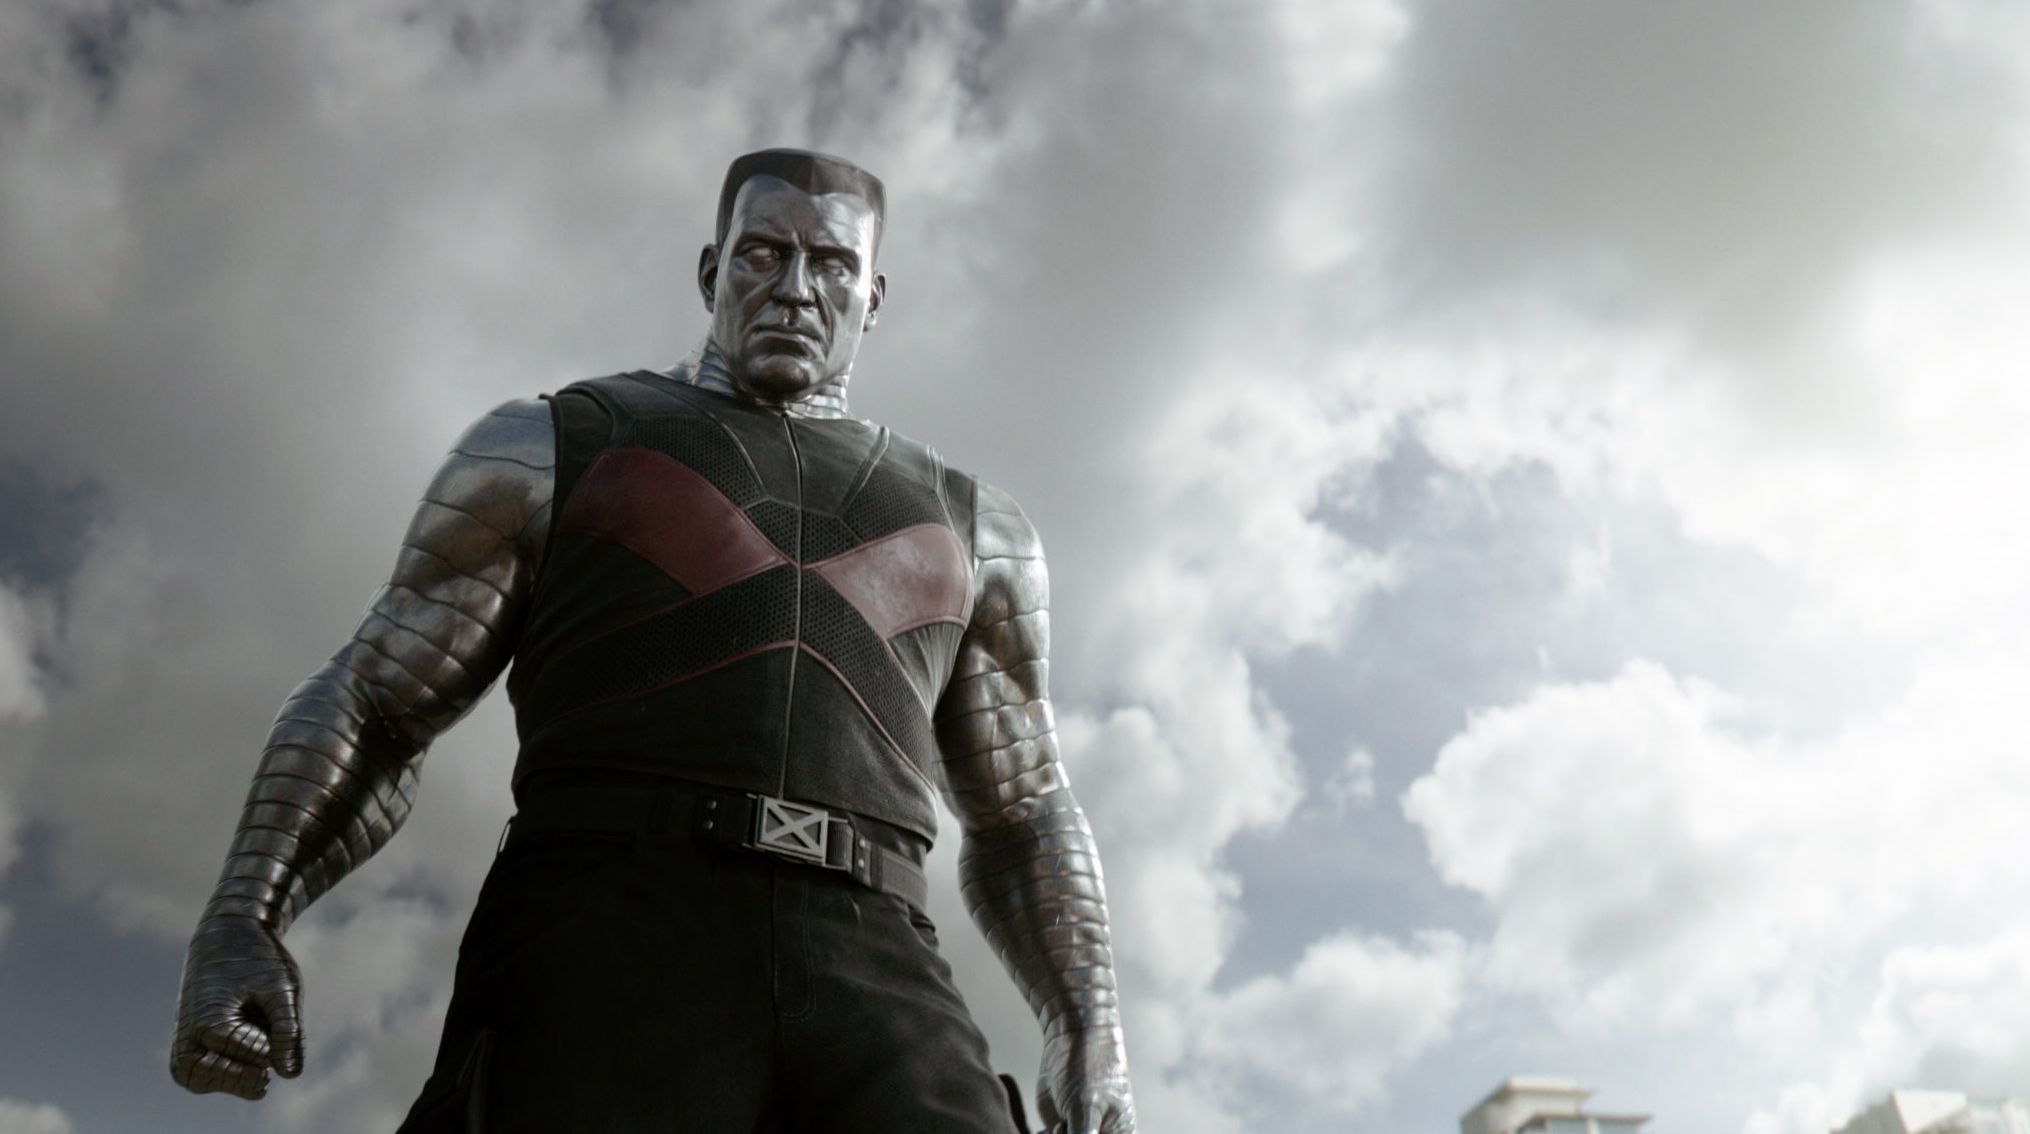 Colossus, played by Stefan Capicic